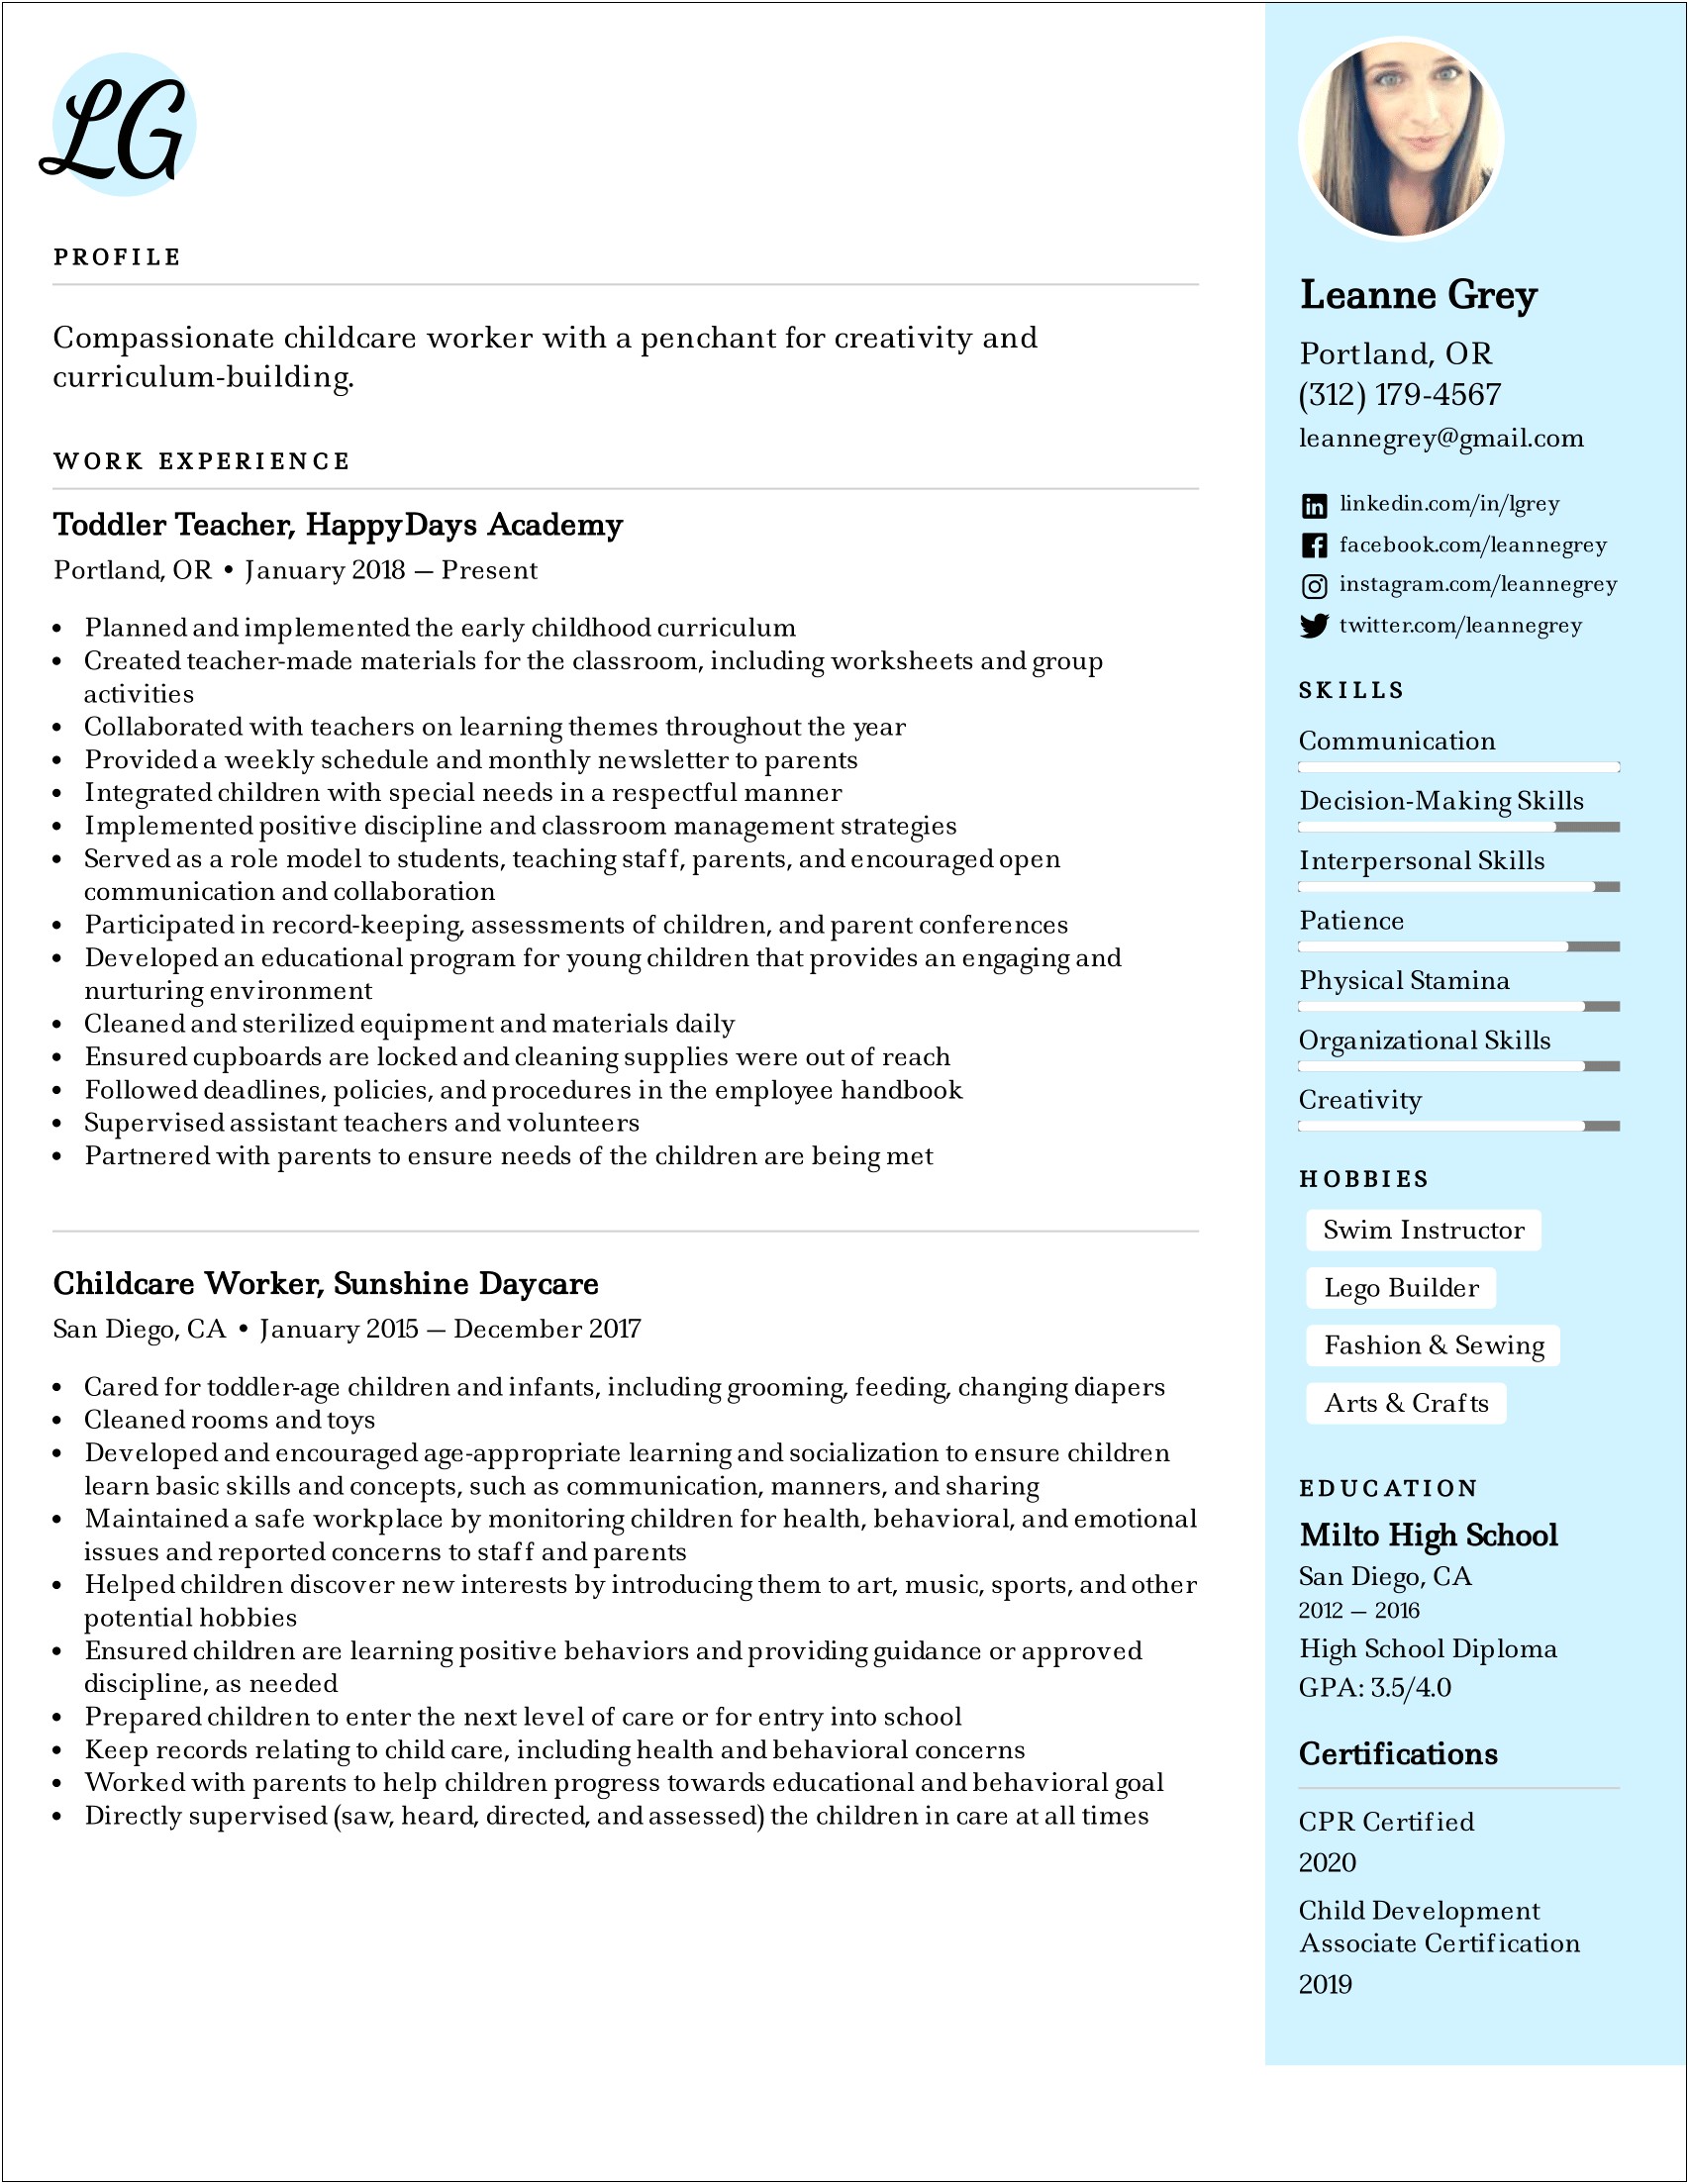 Best Skills And Abilities For A Resume